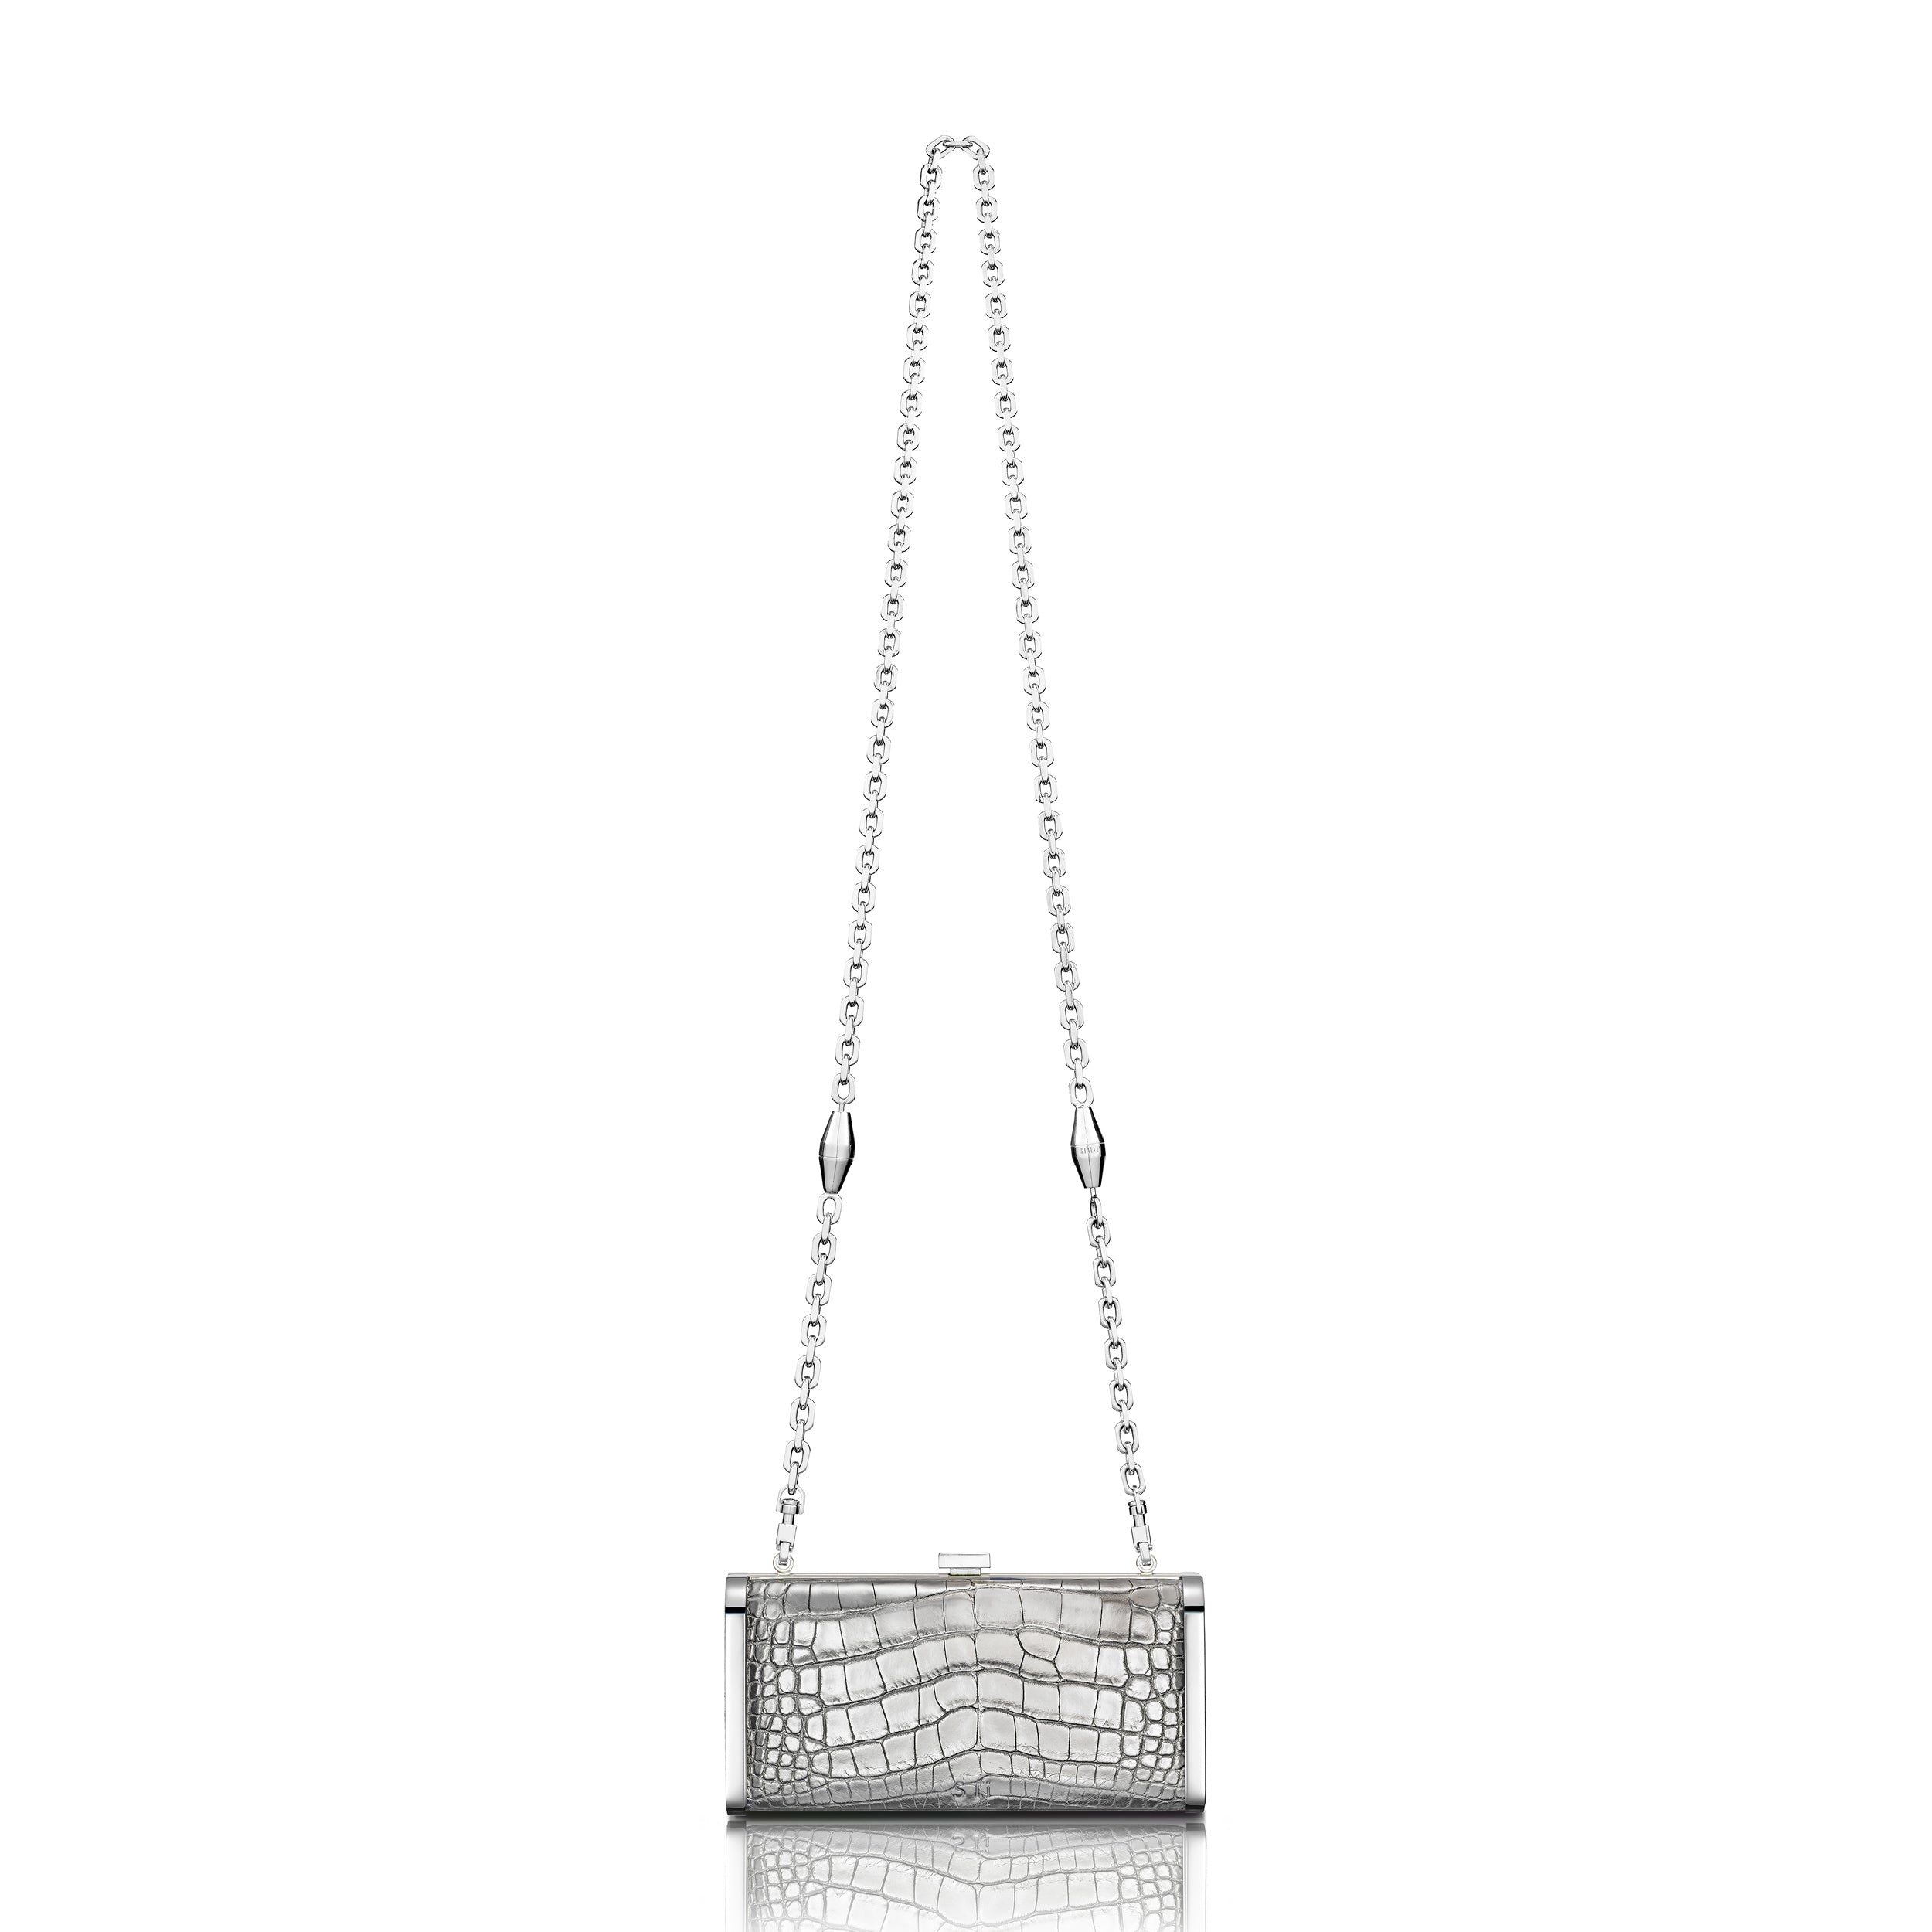 STALVEY Square Clutch in Titanium Alligator with Palladium Hardware Front View with Chain